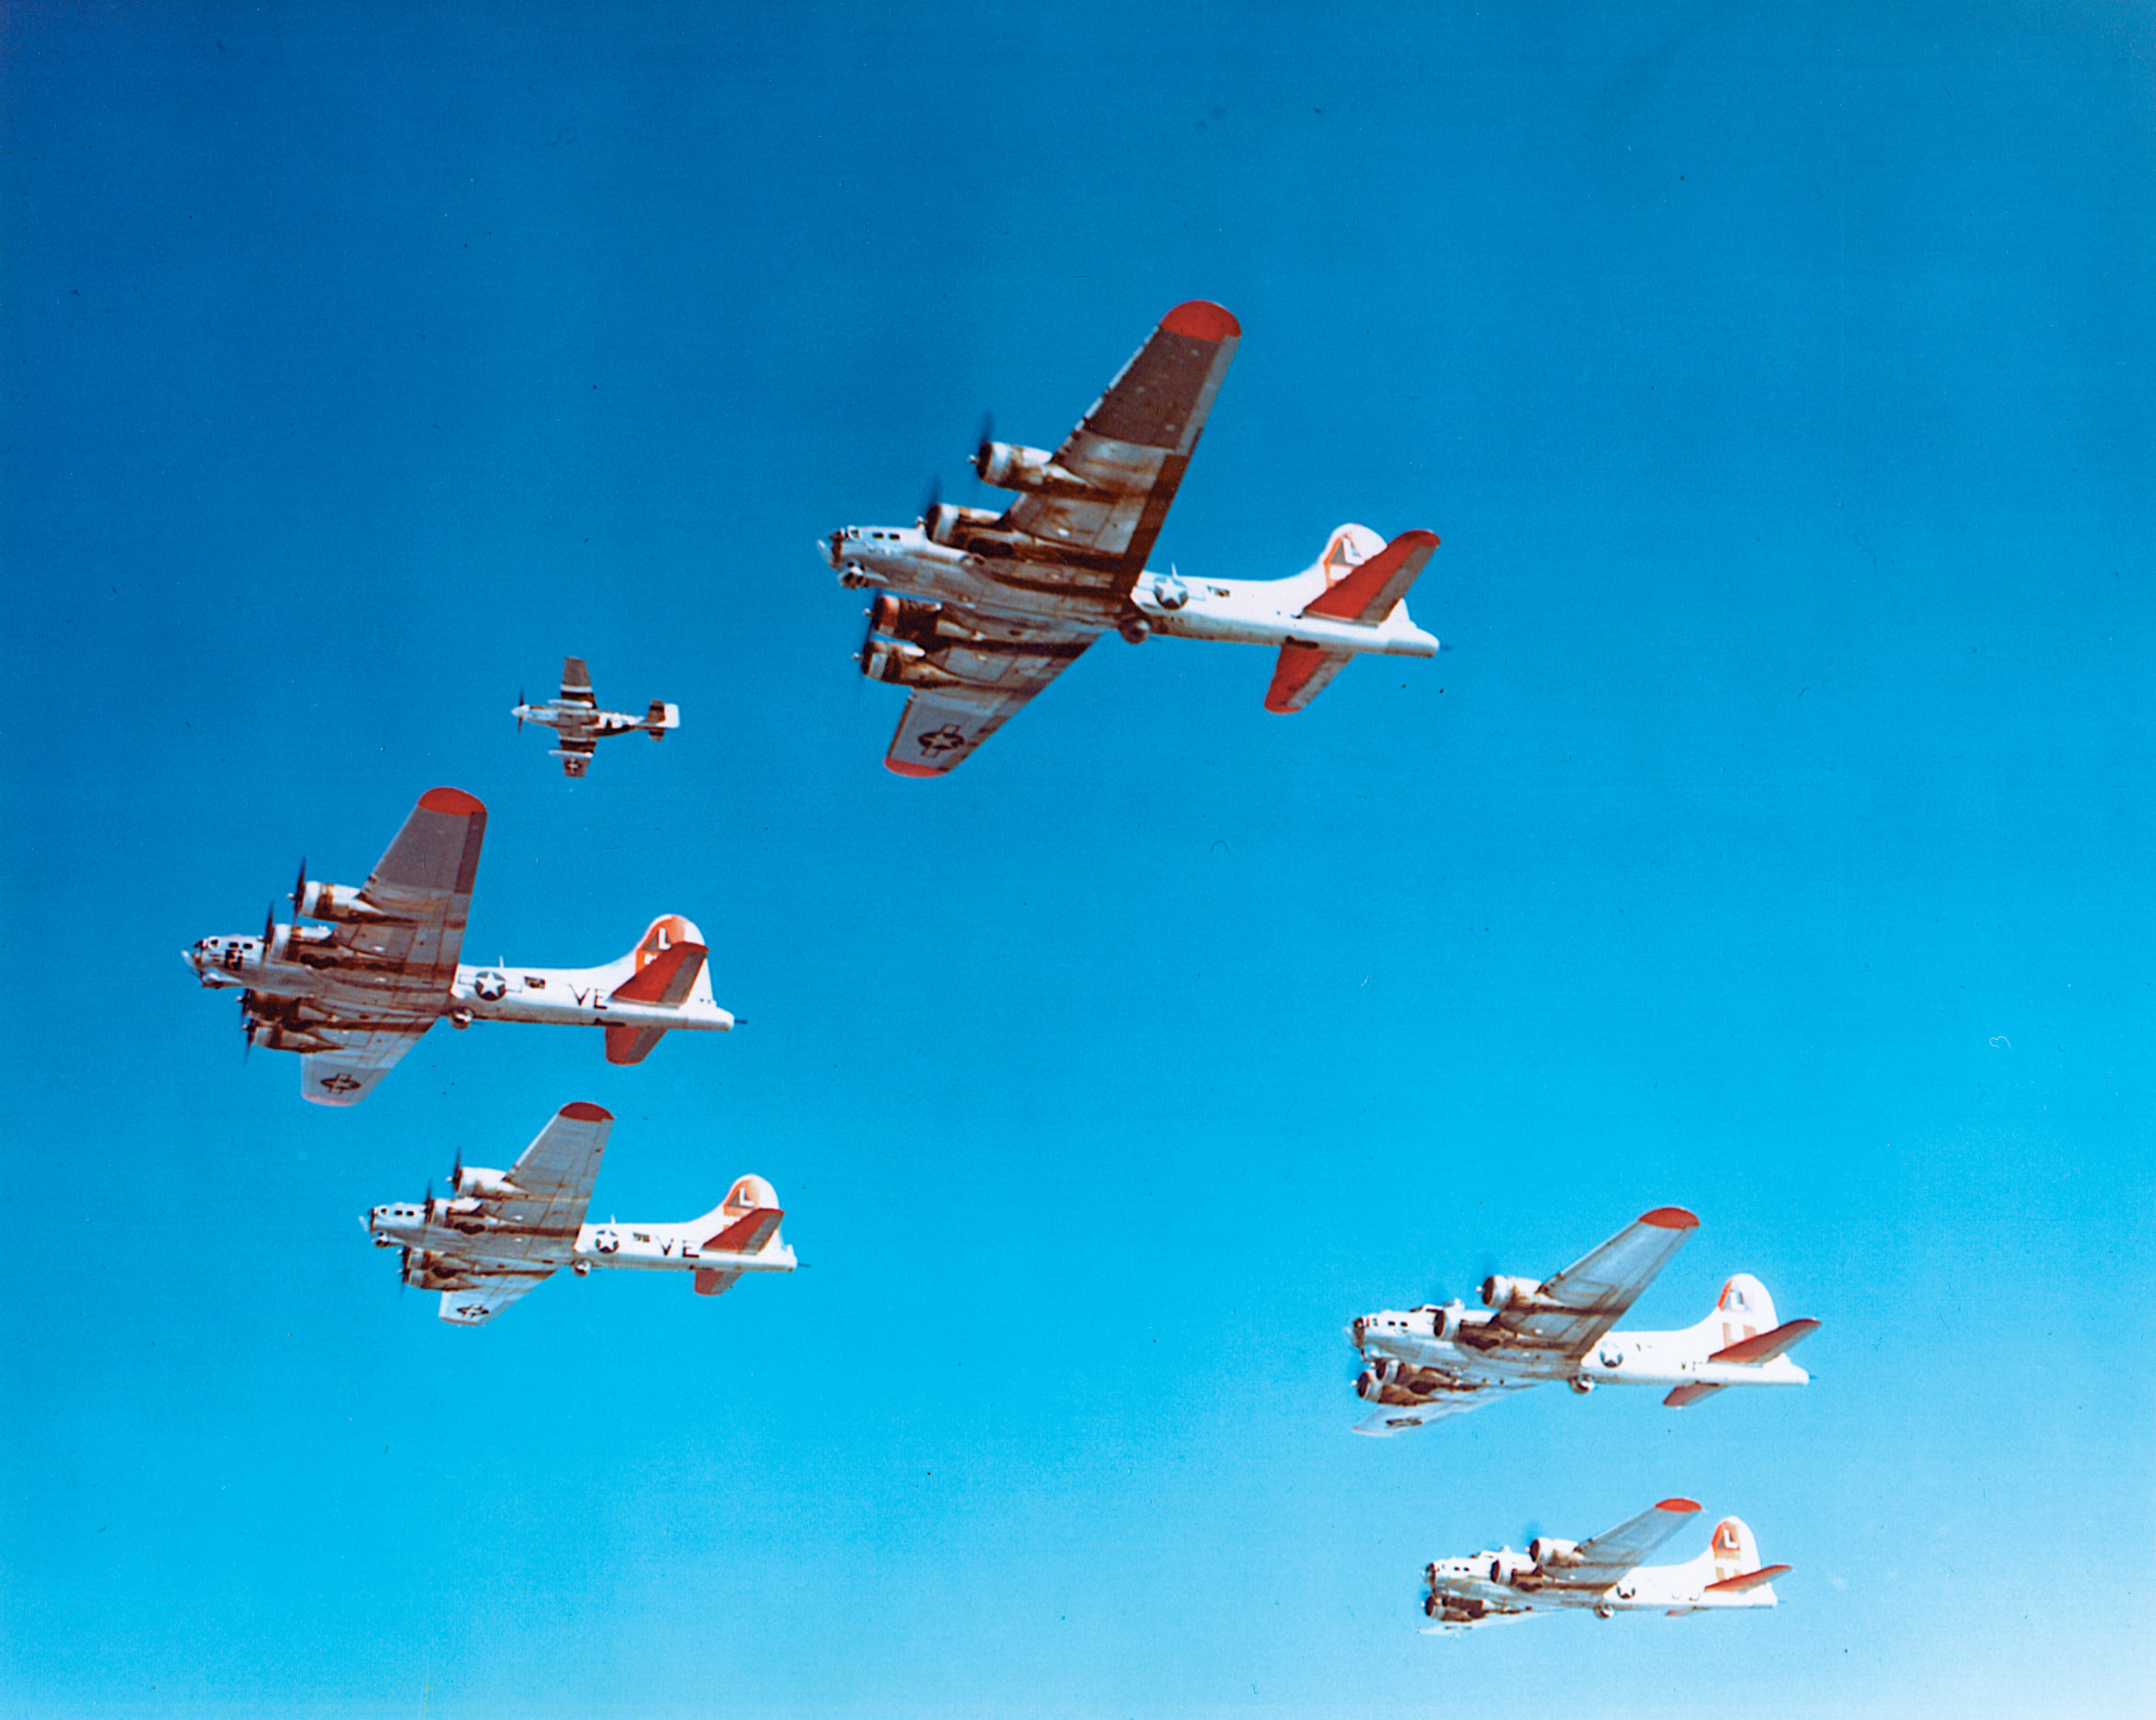 B-17s of the Eighth Air Force fly over England with a P-51 joining the group.